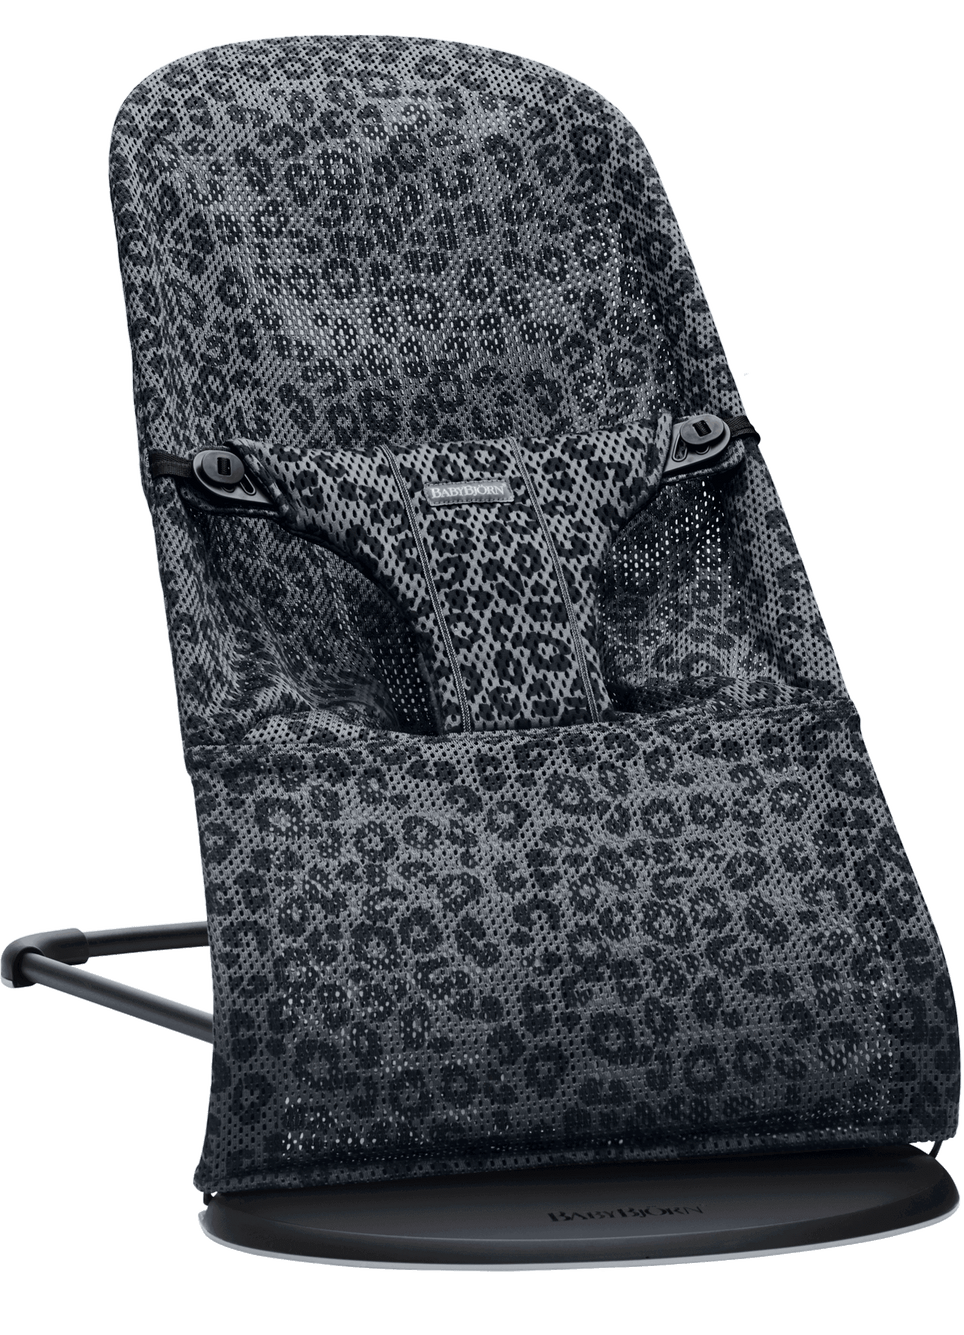 BabyBjorn Bouncer Bliss Mesh - Kiddie Country